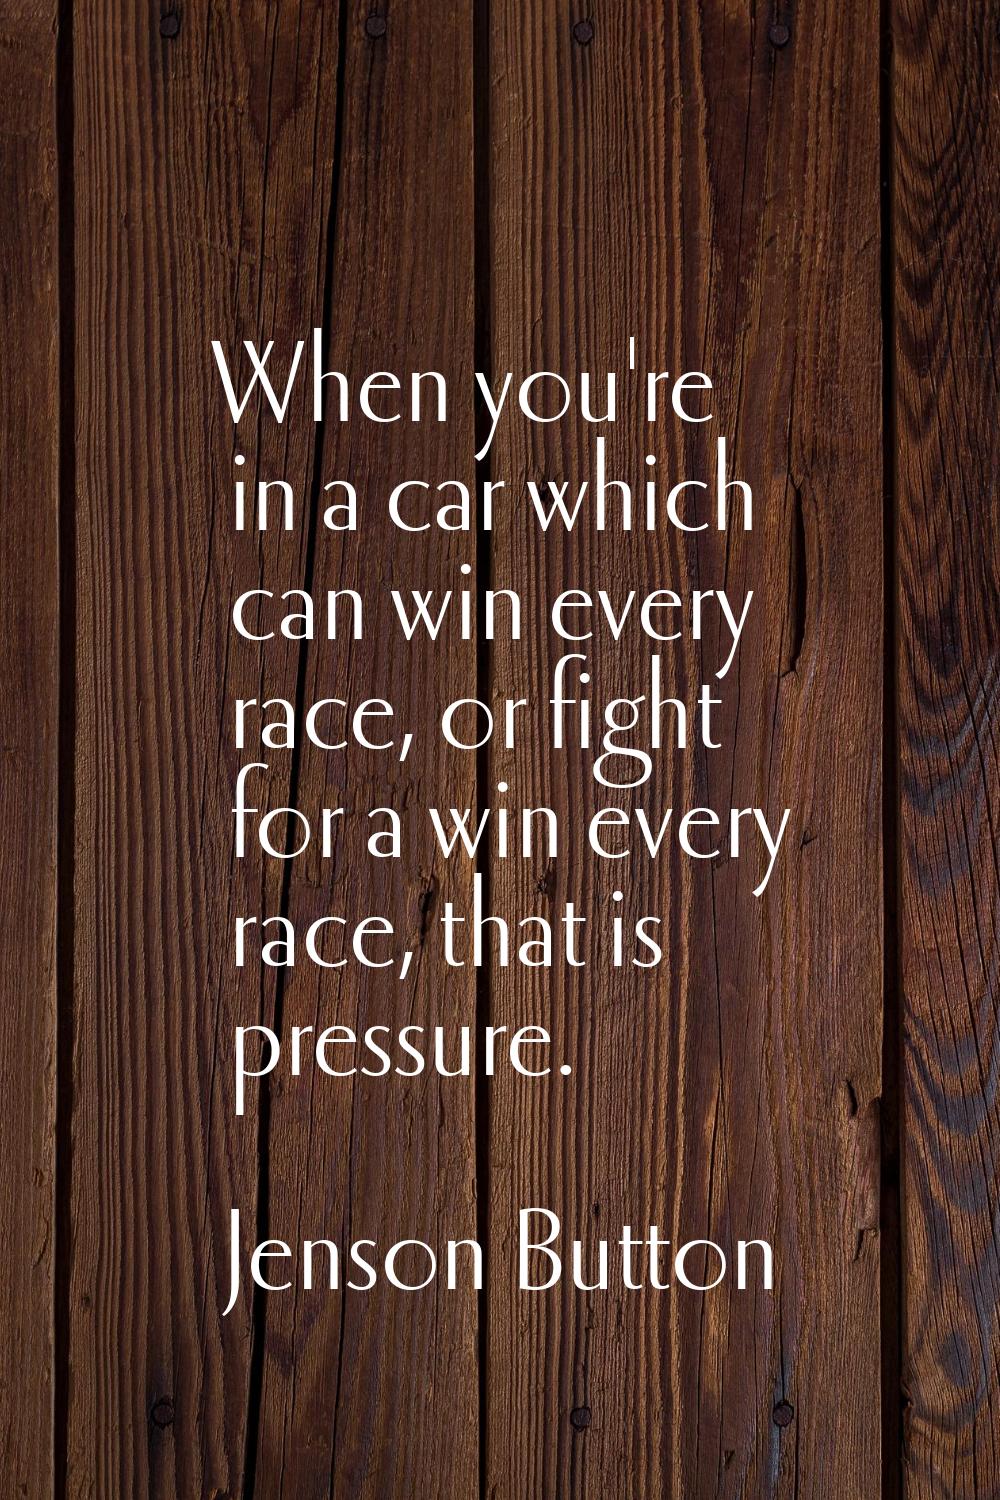 When you're in a car which can win every race, or fight for a win every race, that is pressure.